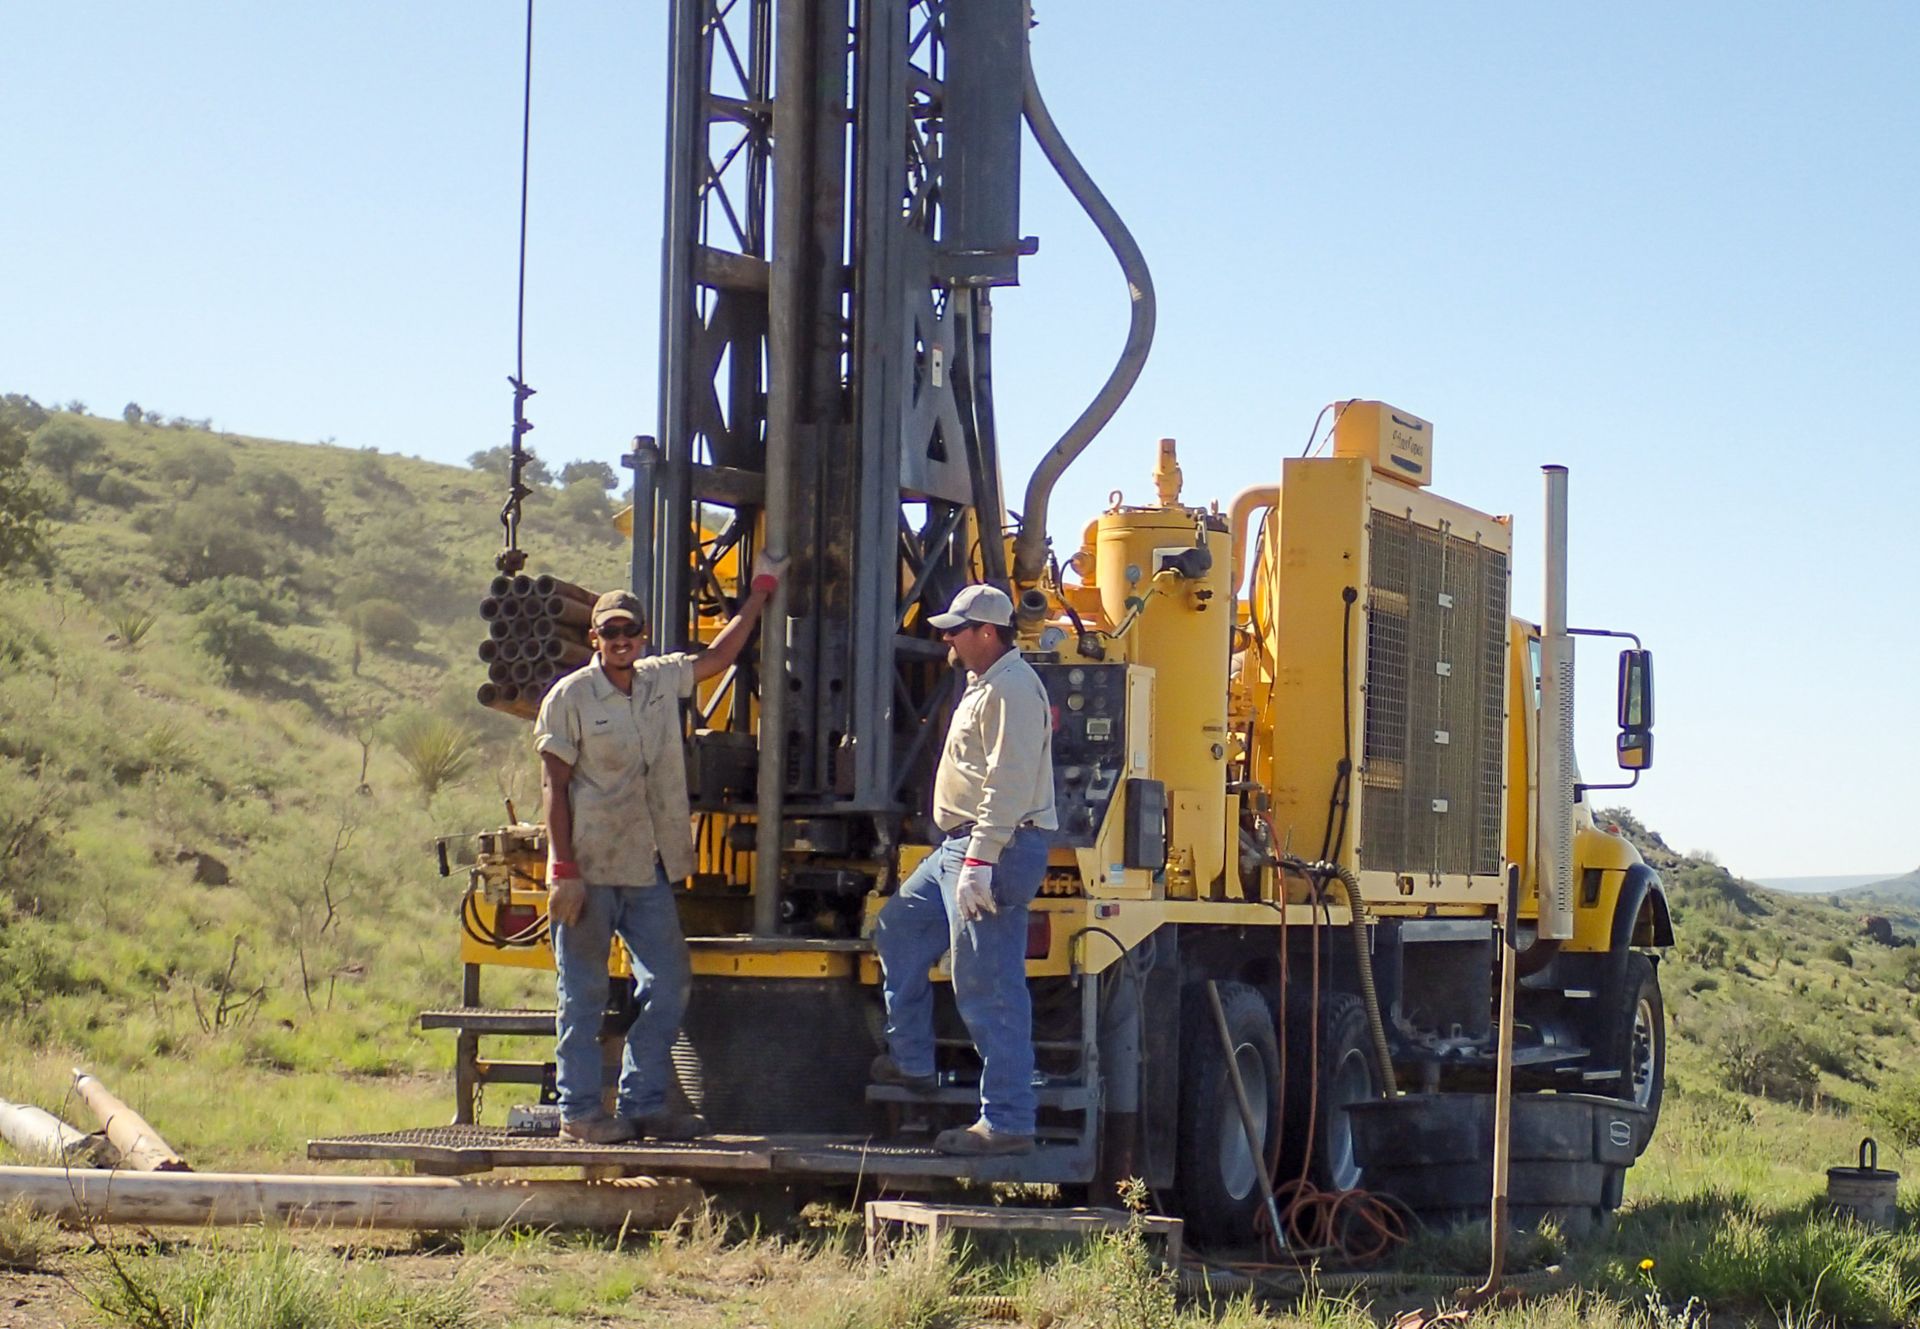 skinner's well drillers standing with well drilling equipment - Brewster County, Presidio County, Jeff Davis County, Pecos County, Reeves County, Terrell County